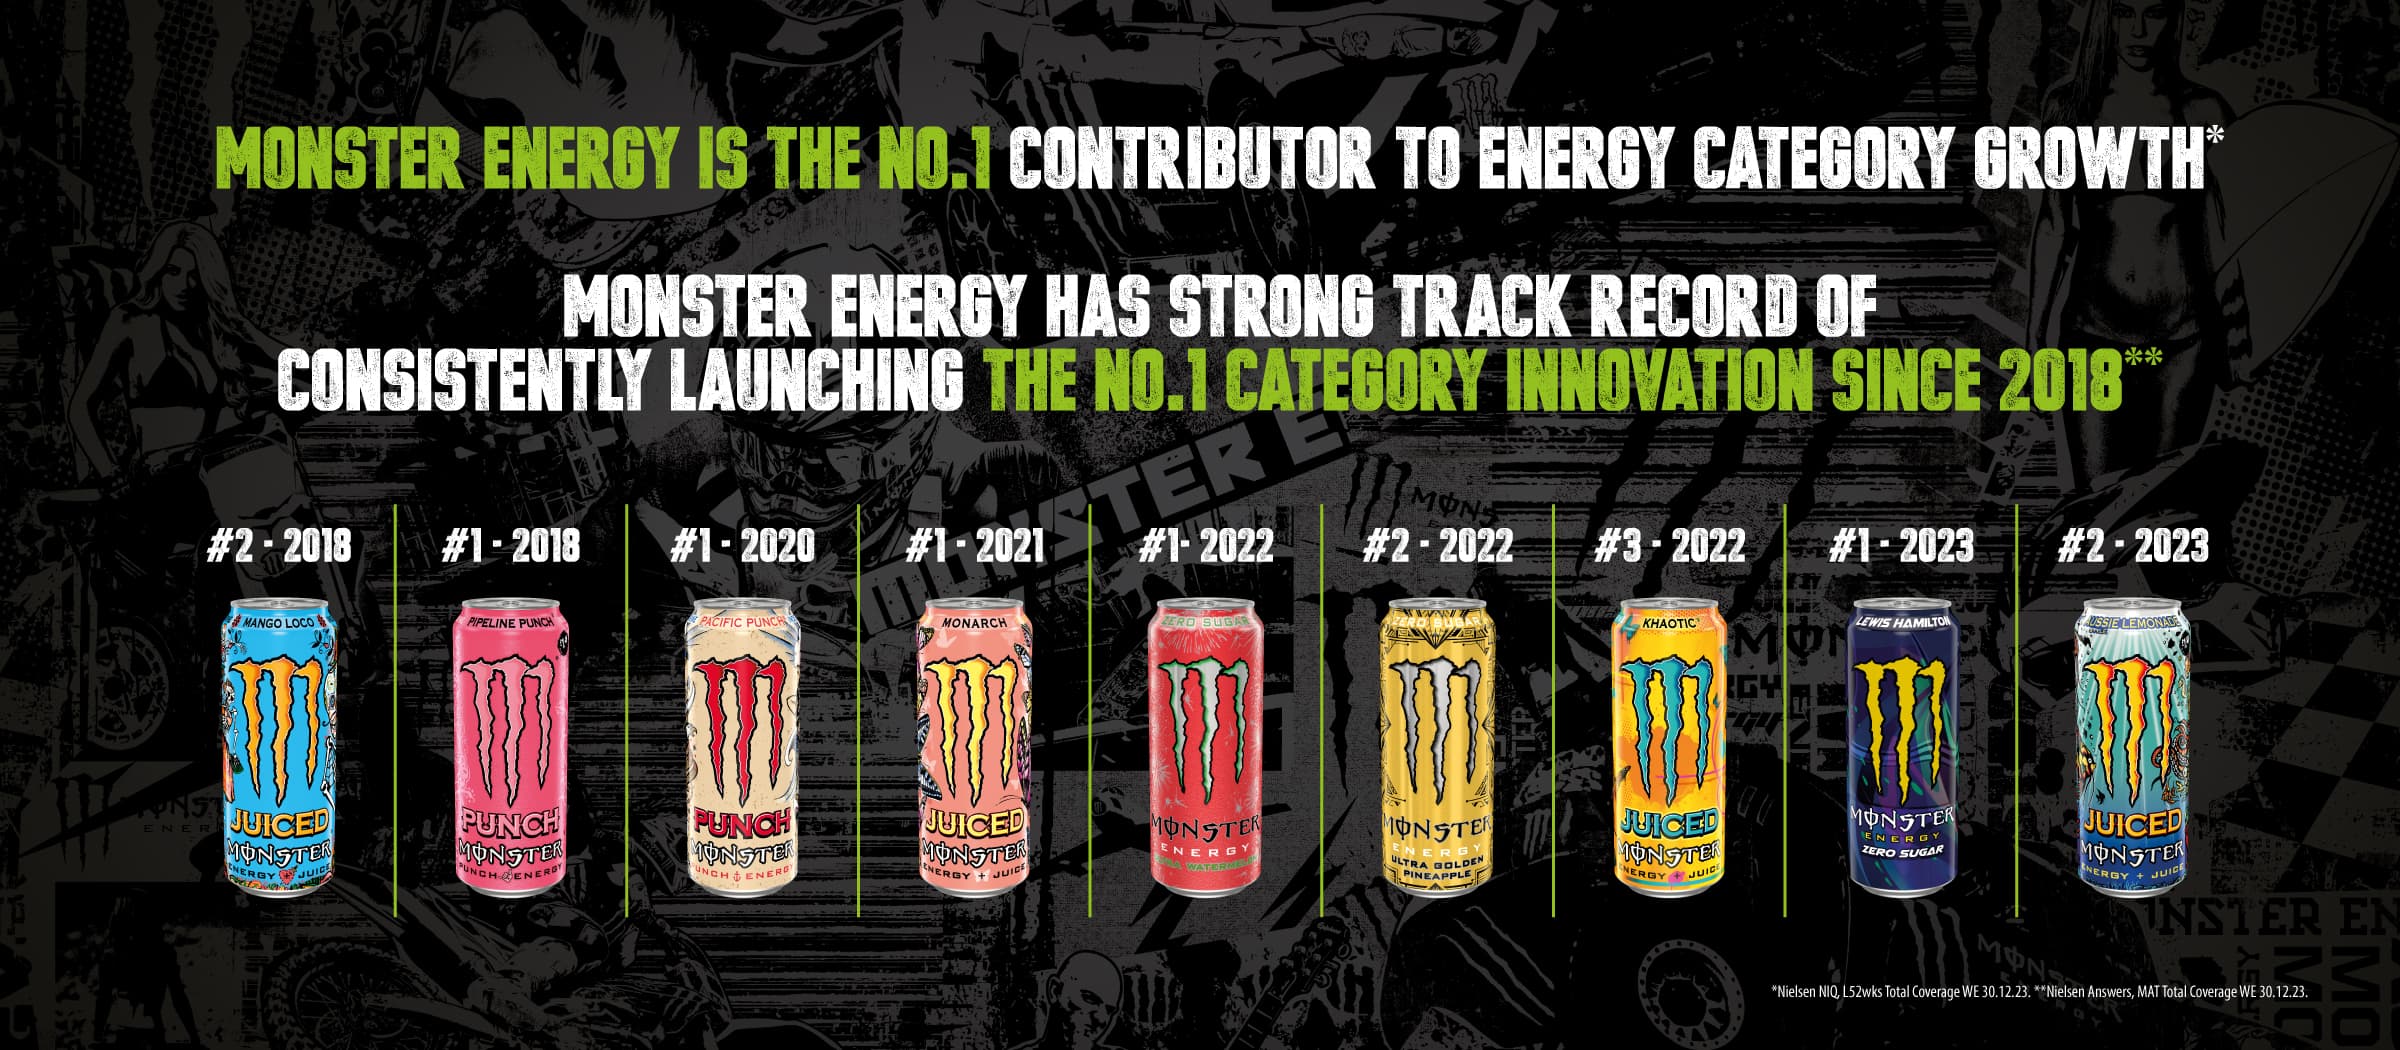 Monster Energy is the No.1 contributor to energy category growth*